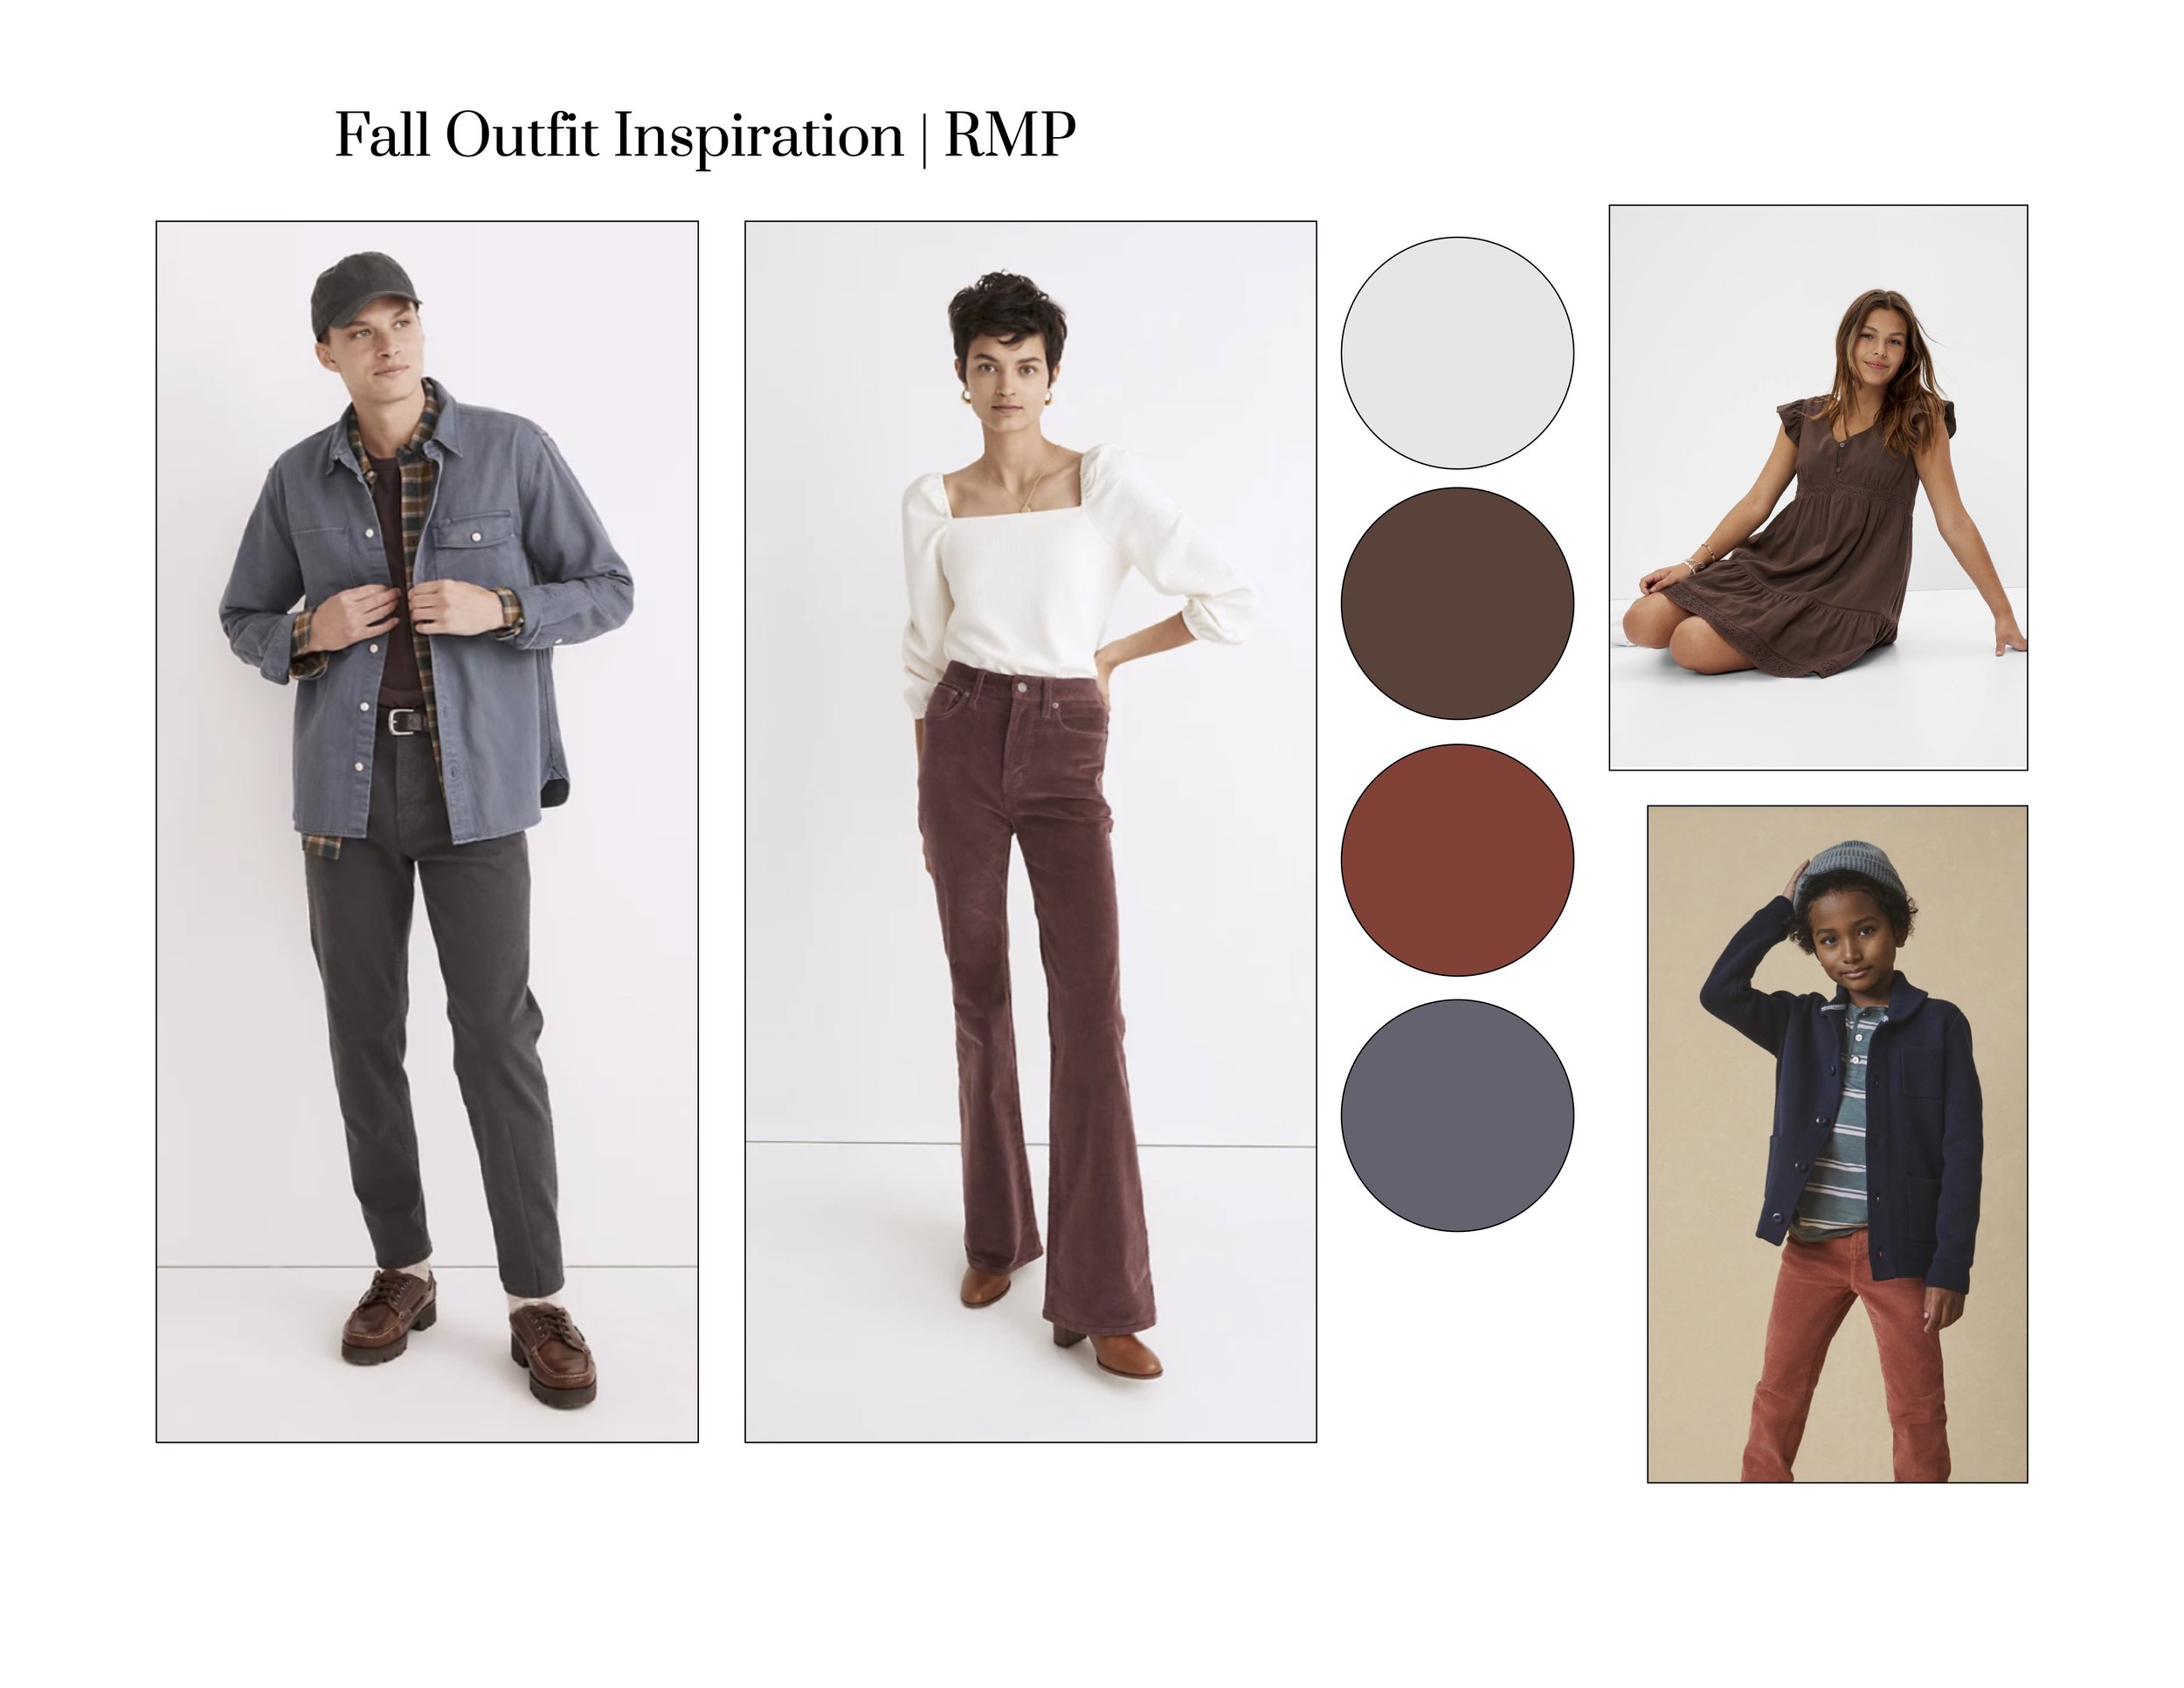 Fall Outfit Inspiration 4.jpg